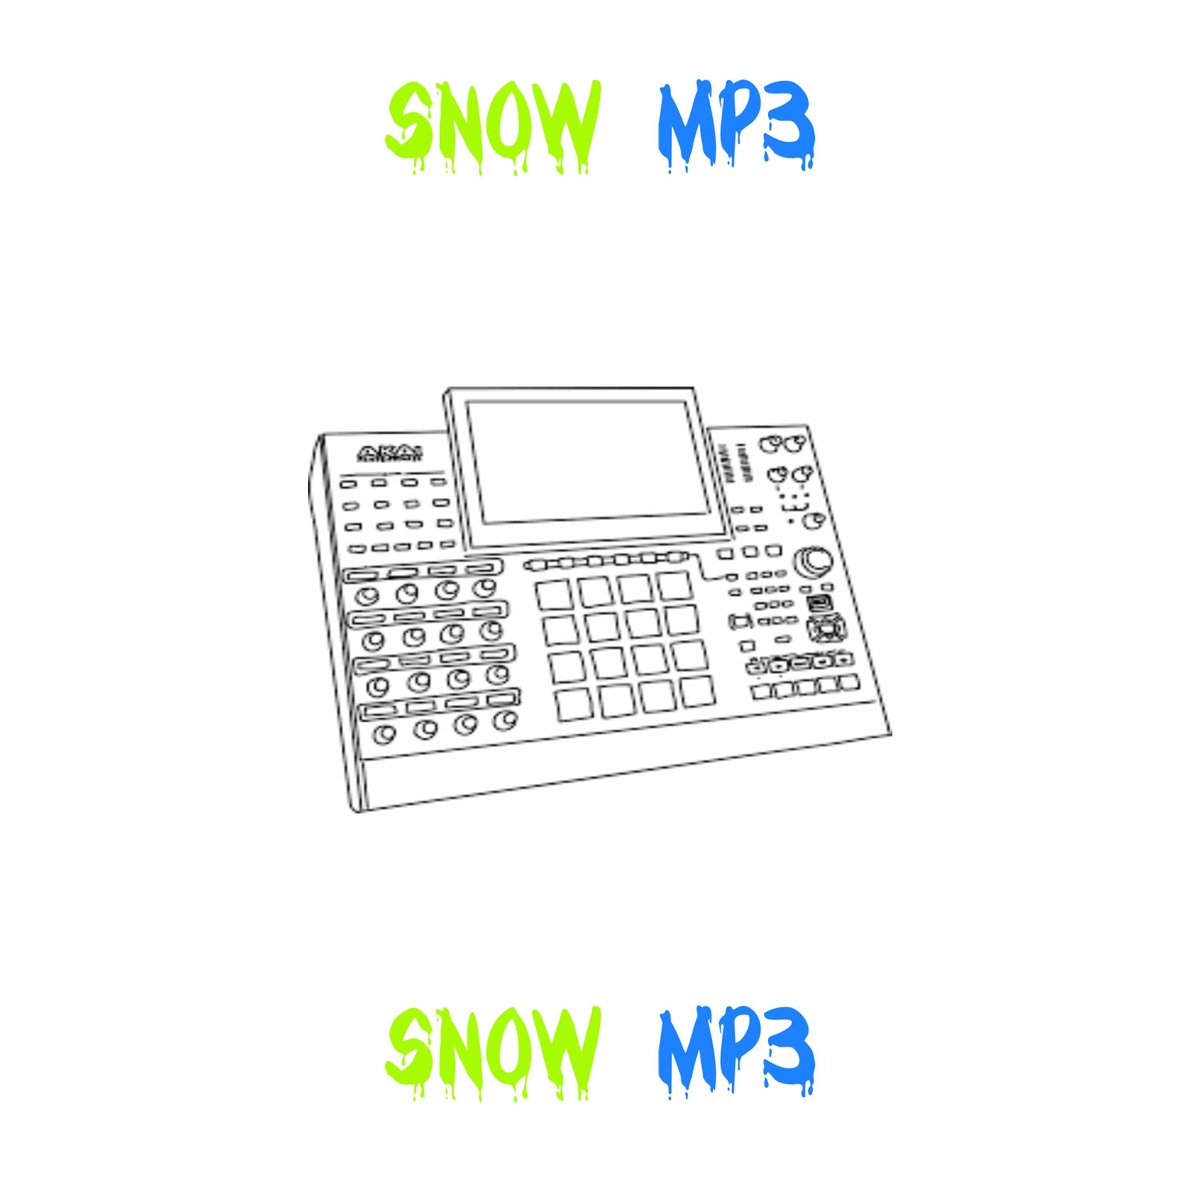 Snow Mp3 - Single - Album by WilliamDaProducer - Apple Music